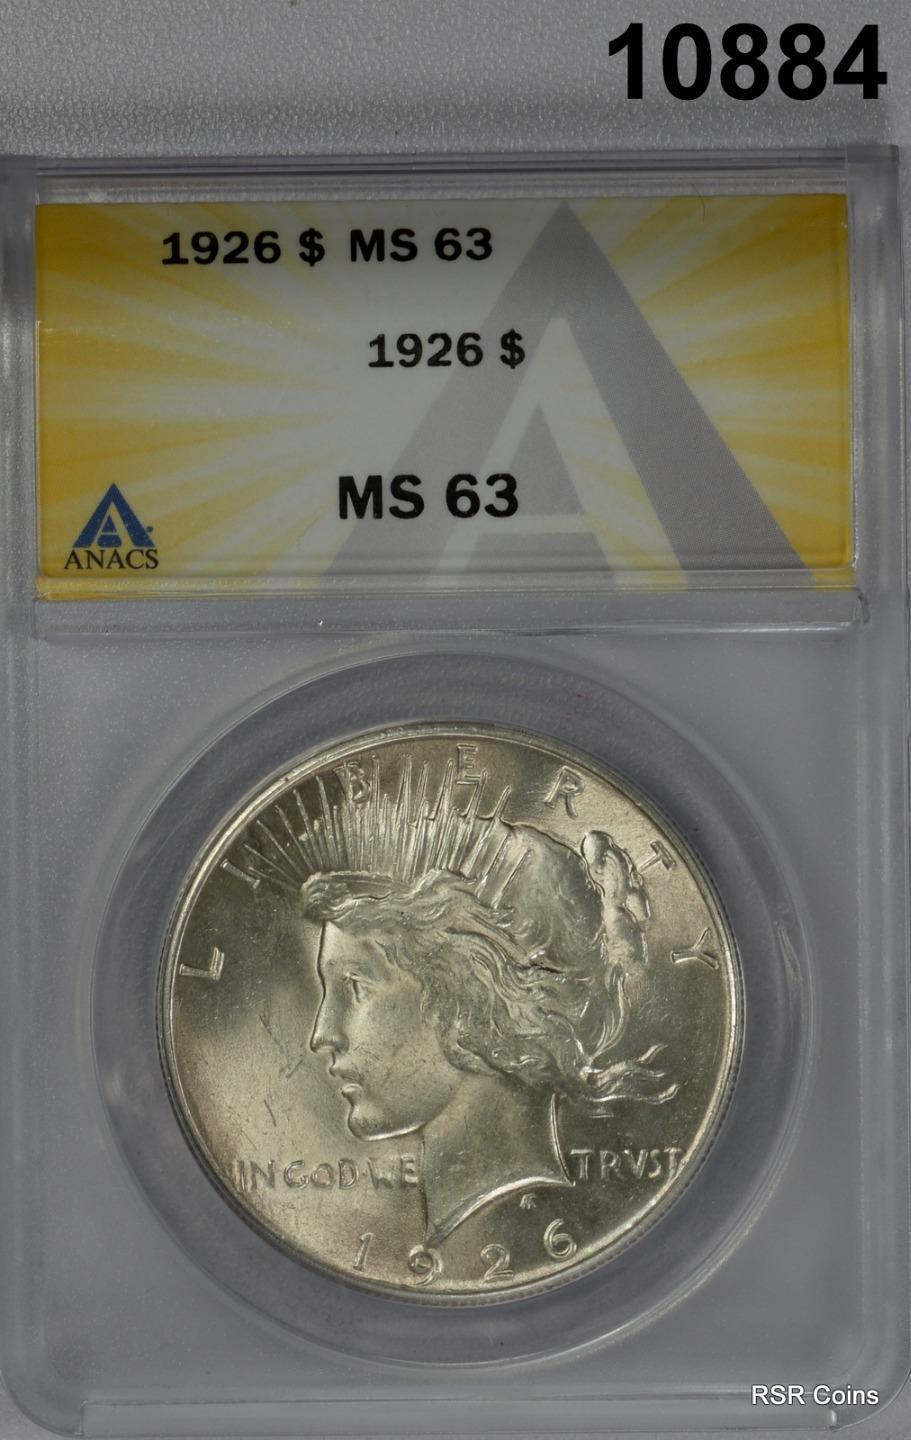 1926 PEACE SILVER DOLLAR ANACS CERTIFIED MS63 LOOKS BETTER! #10884